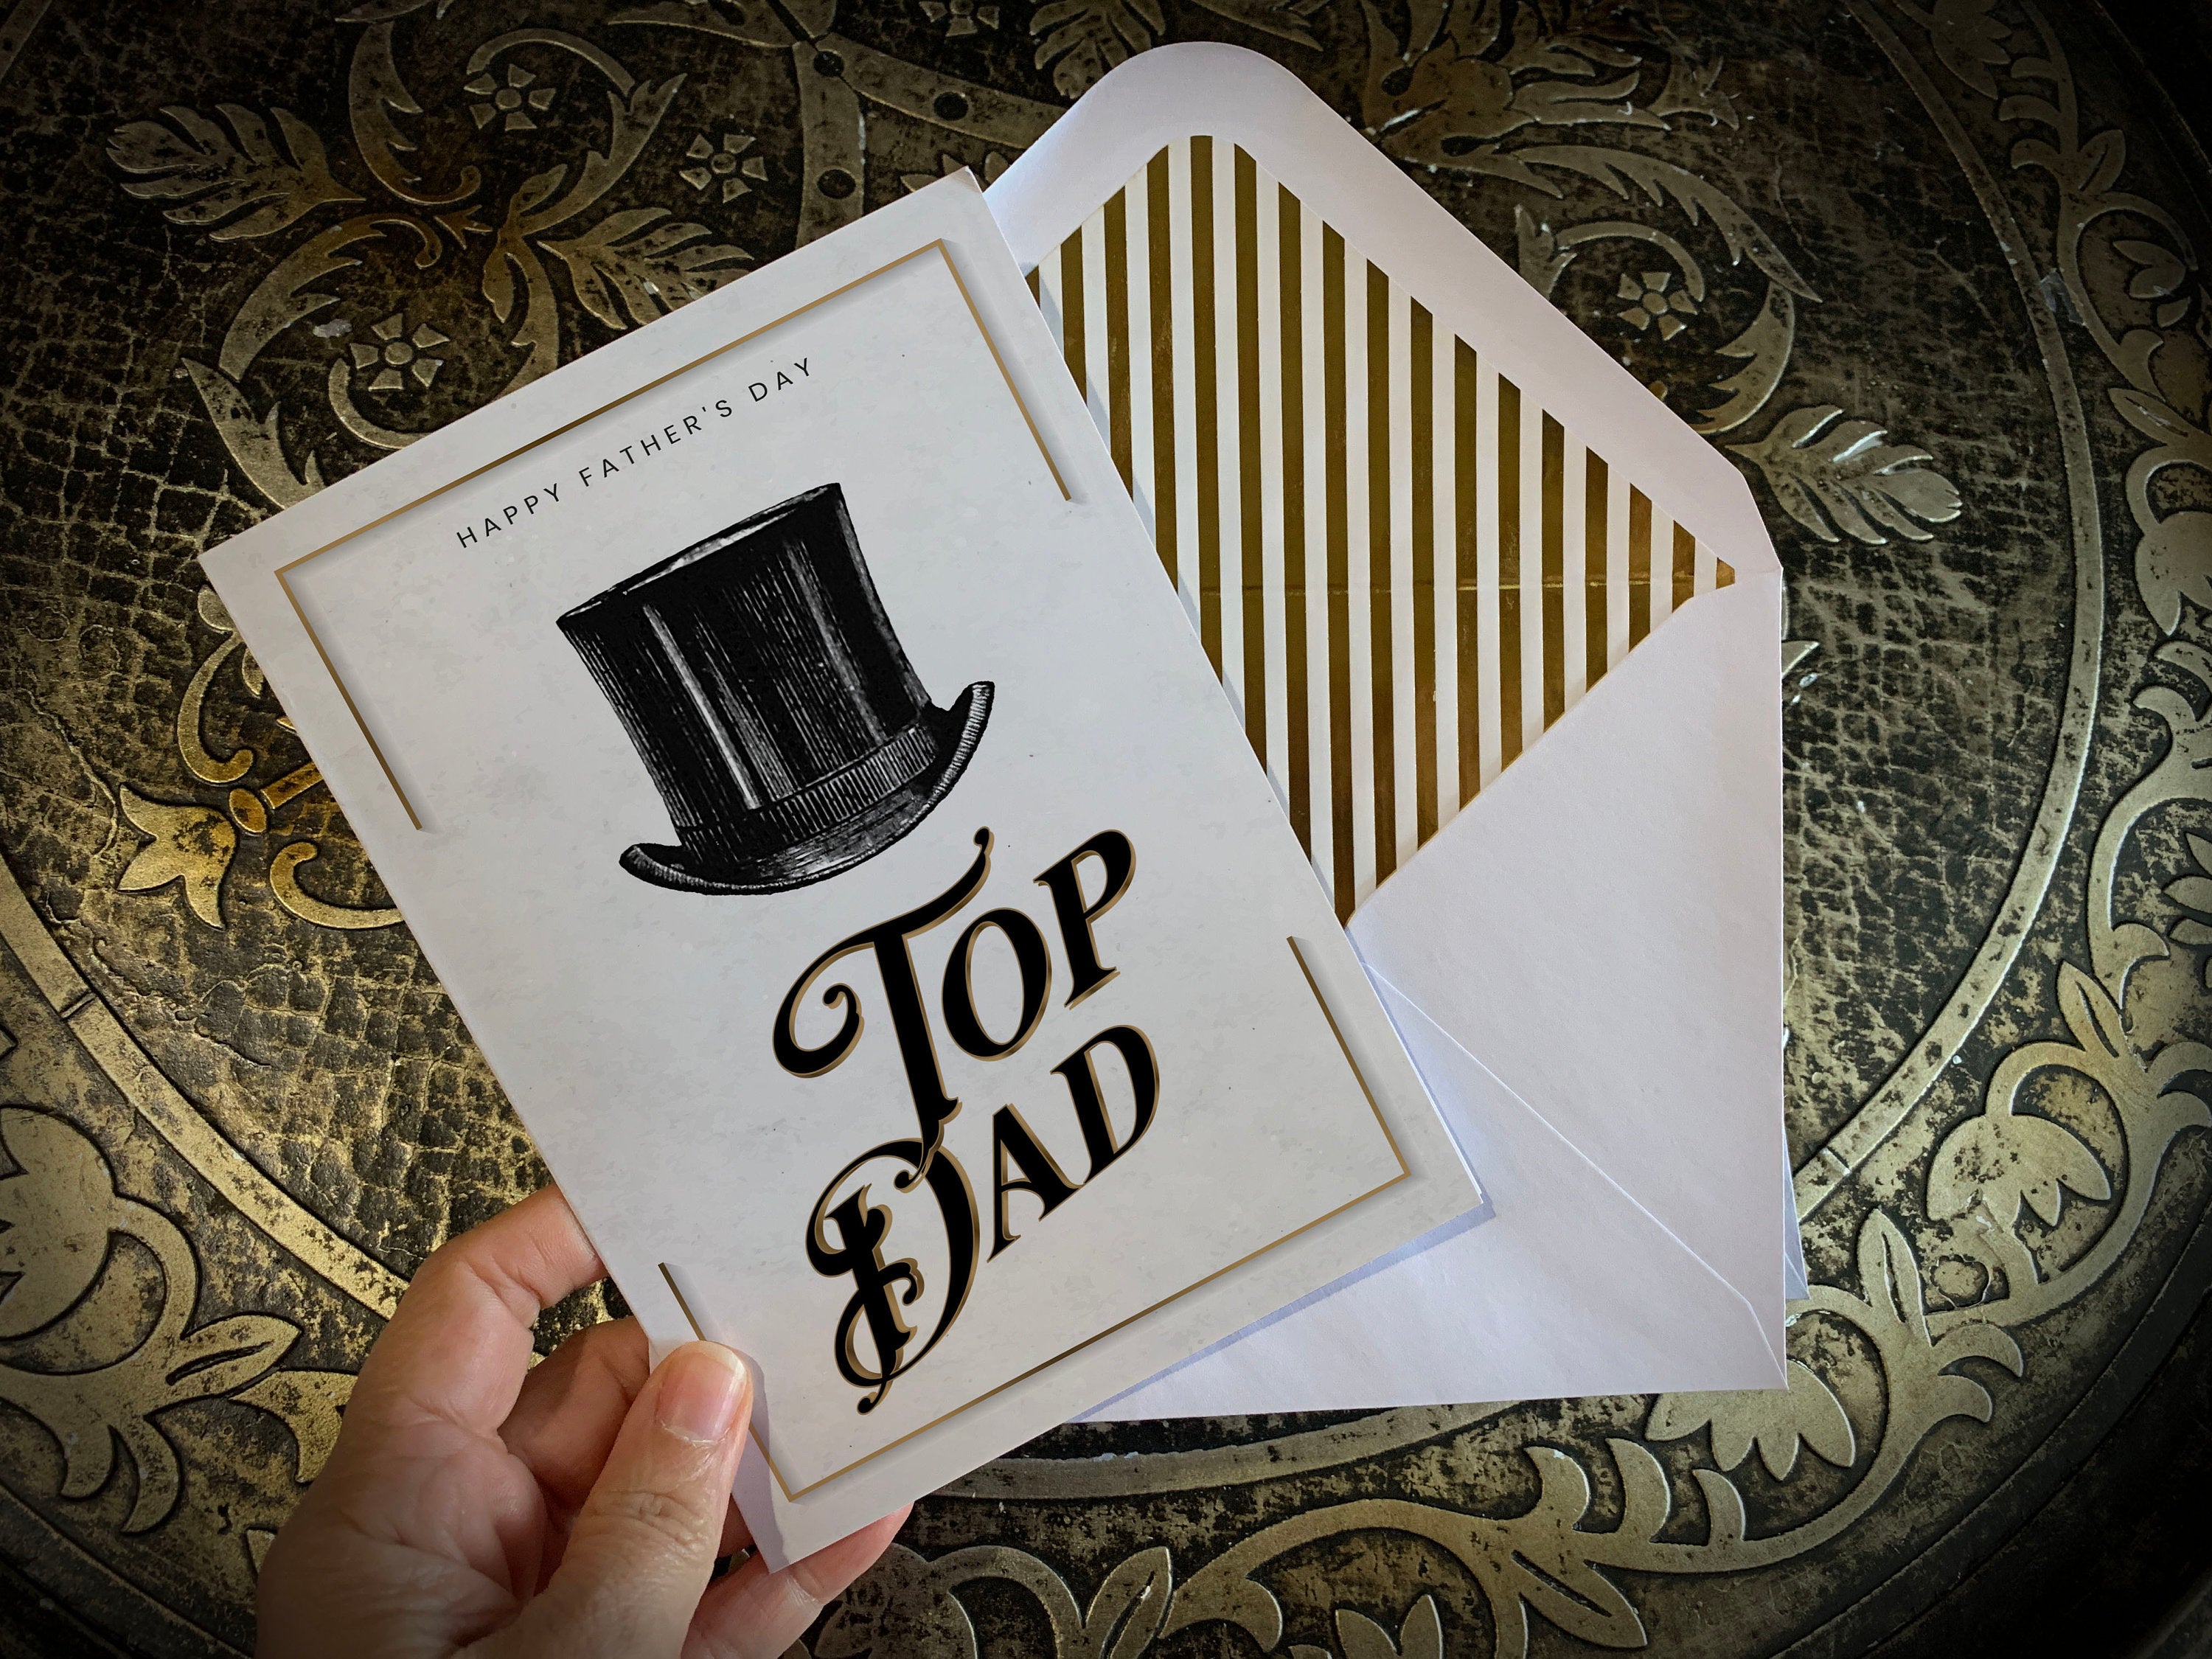 Top Dad, Father's Day Greeting Card with Elegant Striped Gold Foil Envelope, 1 Card/Envelope